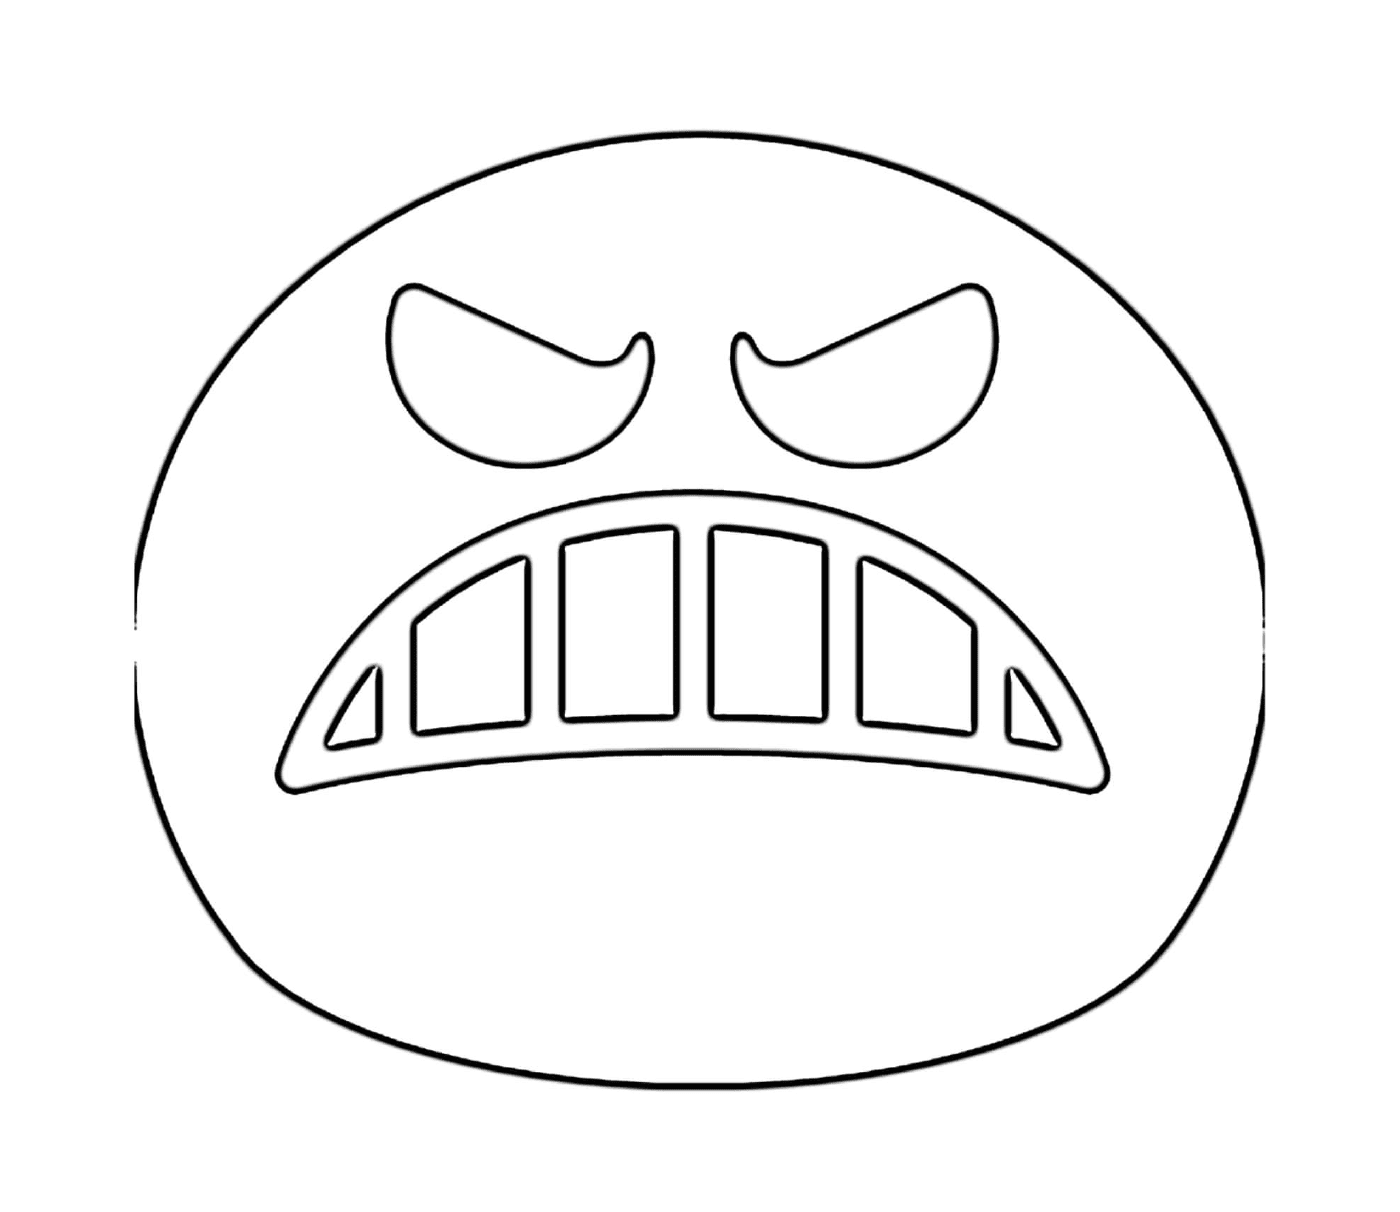  An angry face is drawn 